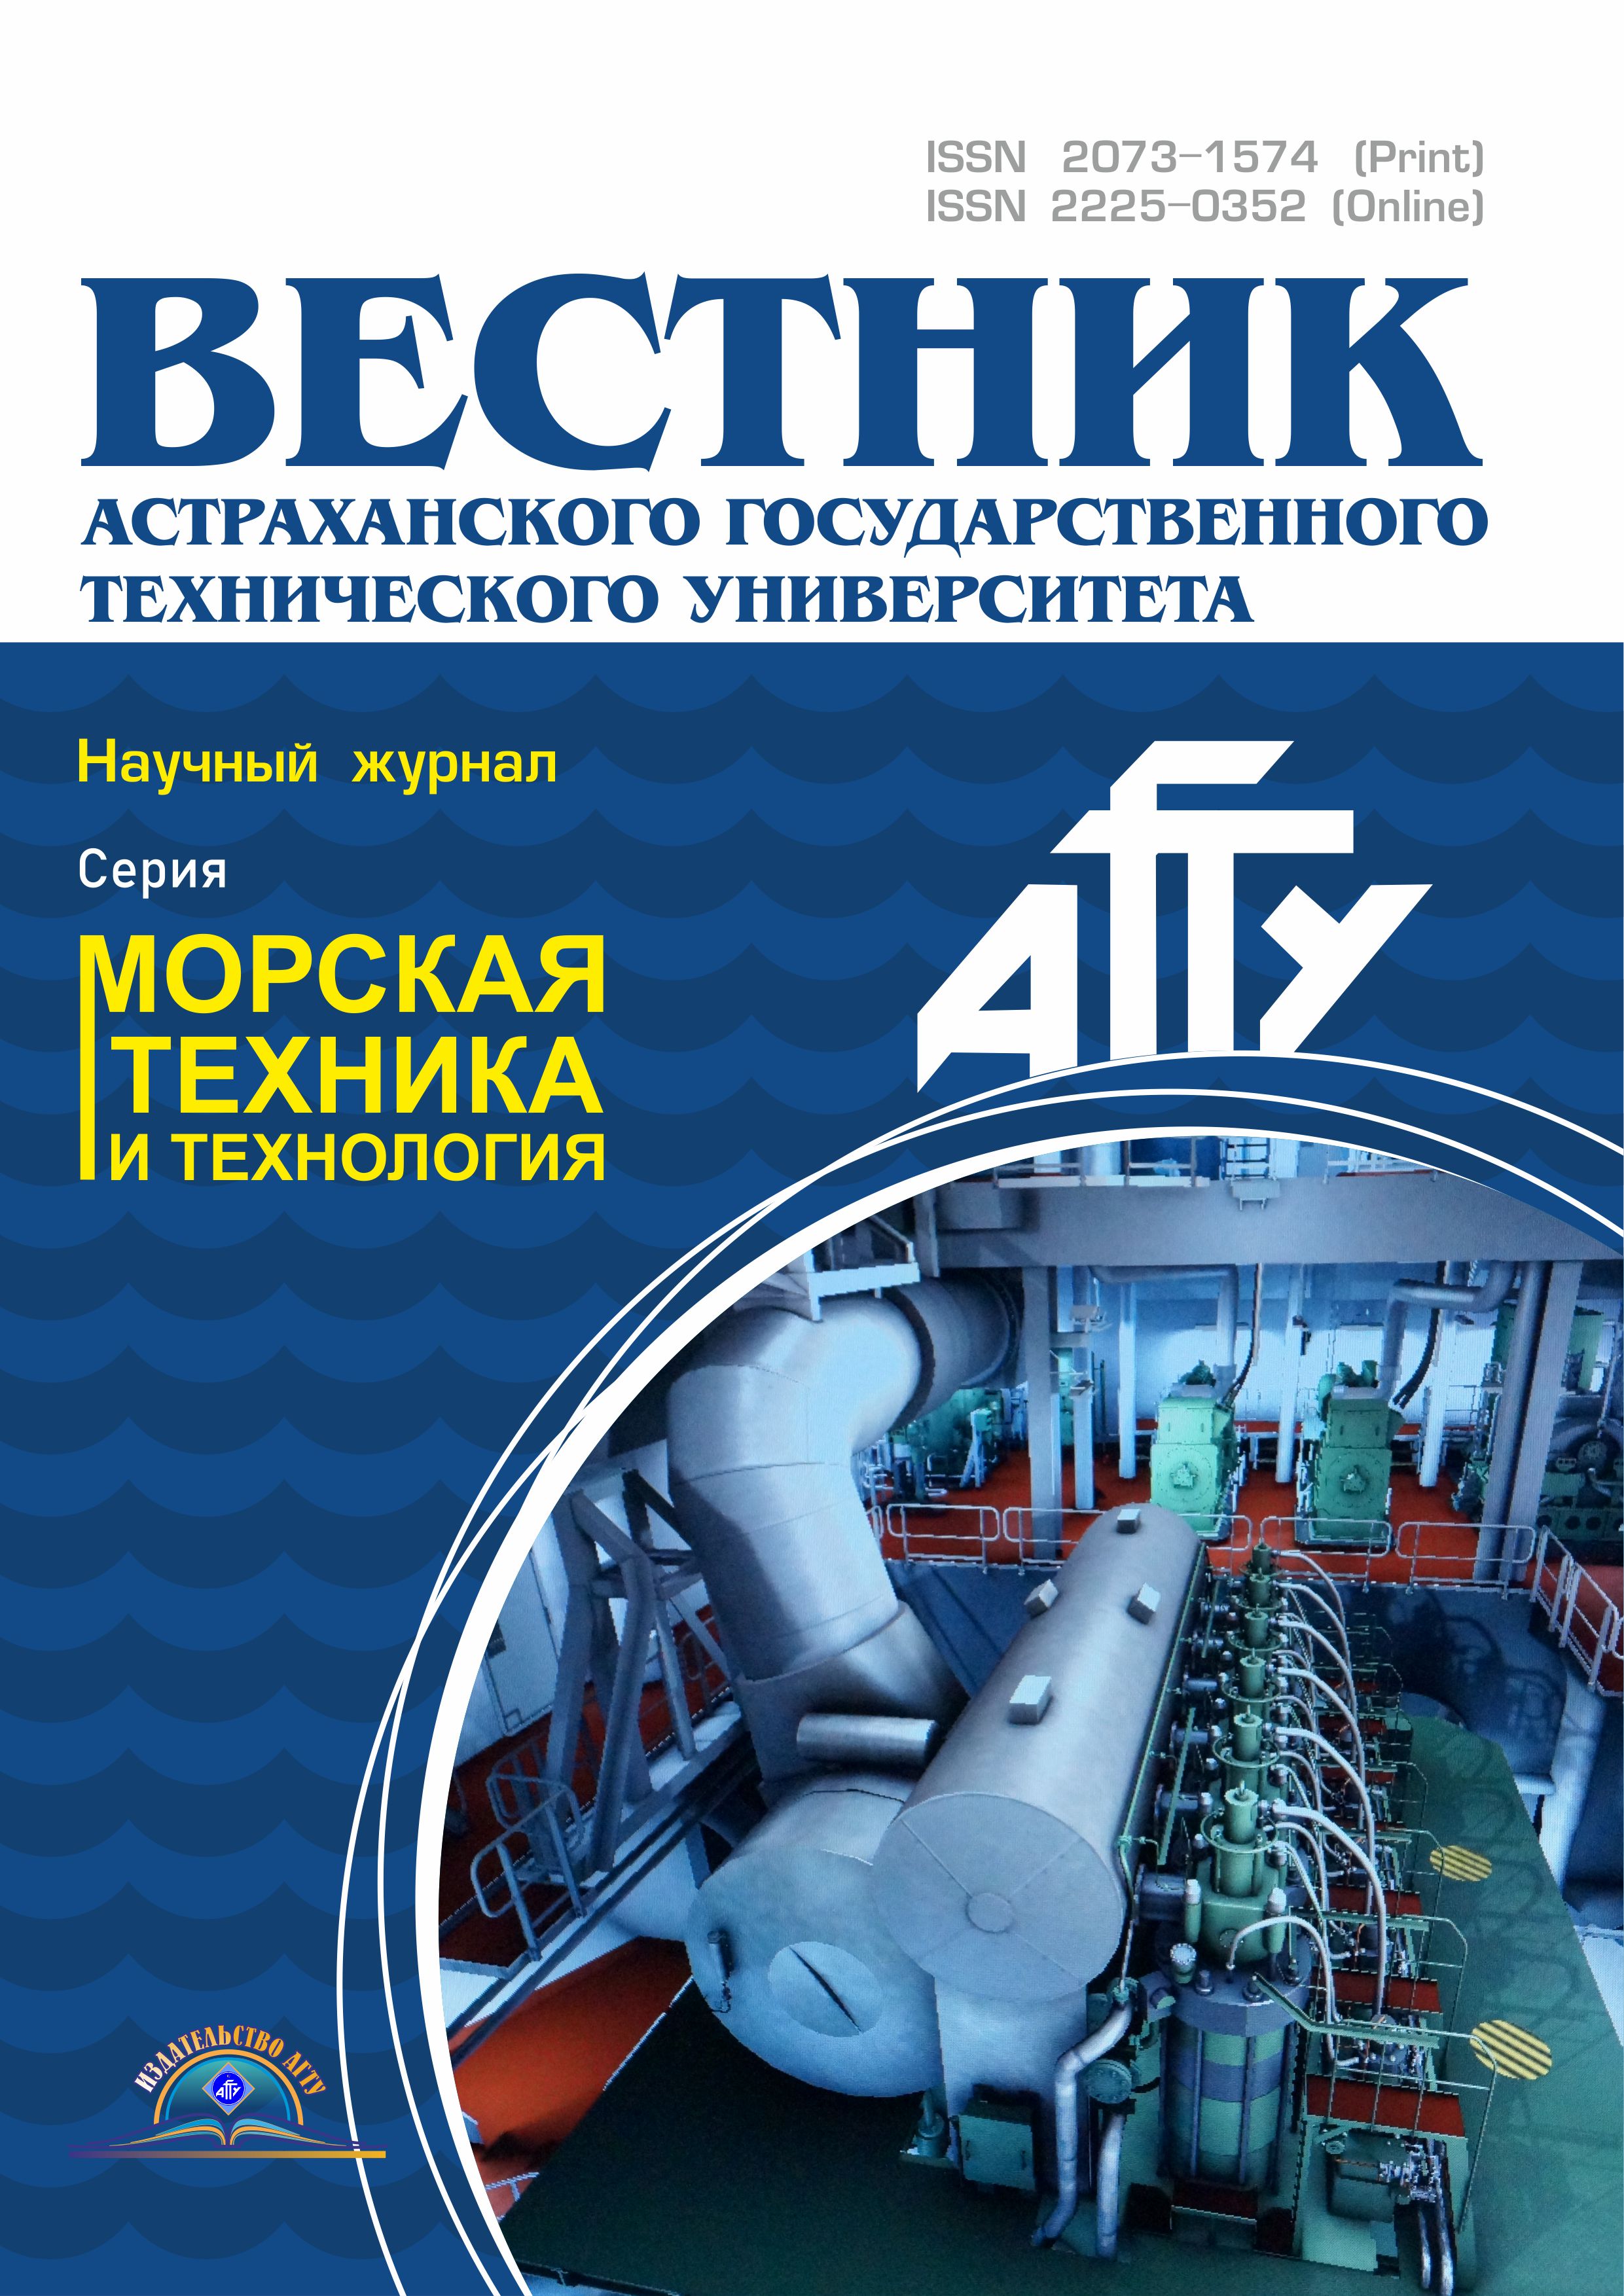                         OPTIMIZATION OF OPERATIONS OF CARGO TERMINALS IN THE SEAPORTS (BY THE EXAMPLE OF THE MURMANSK TRANSPORT NODE)
            